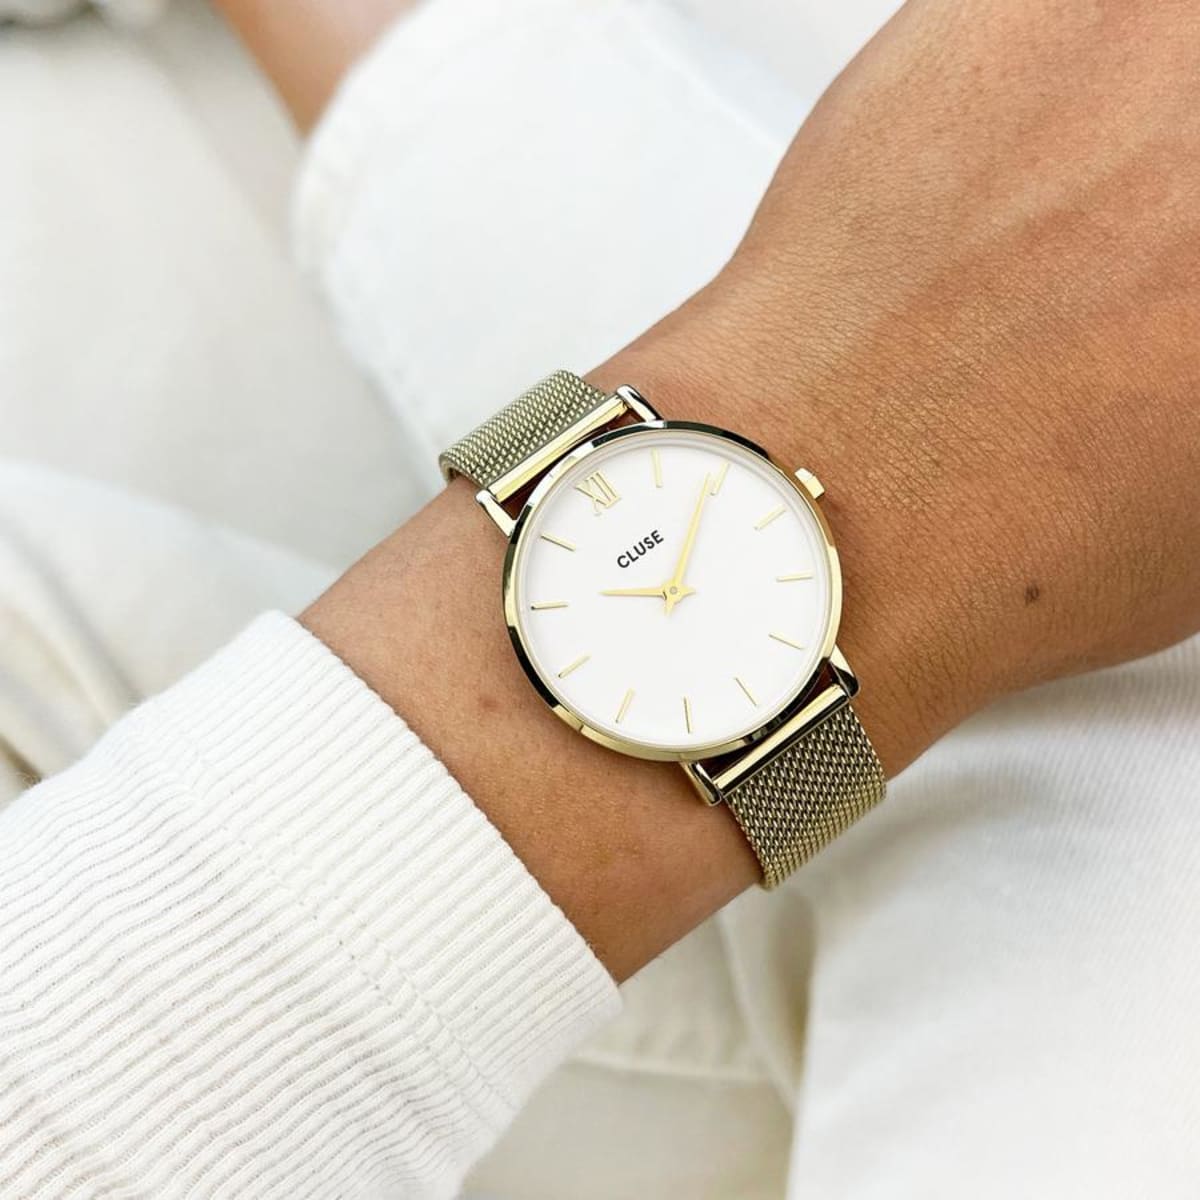 CLUSE Minuit Mesh watch with Yellow gold frame and strap and a clear white dial. A bestseller. The look is iconic, and takes your style from good to high street luxe fashion with only a second on the clock passing by! 